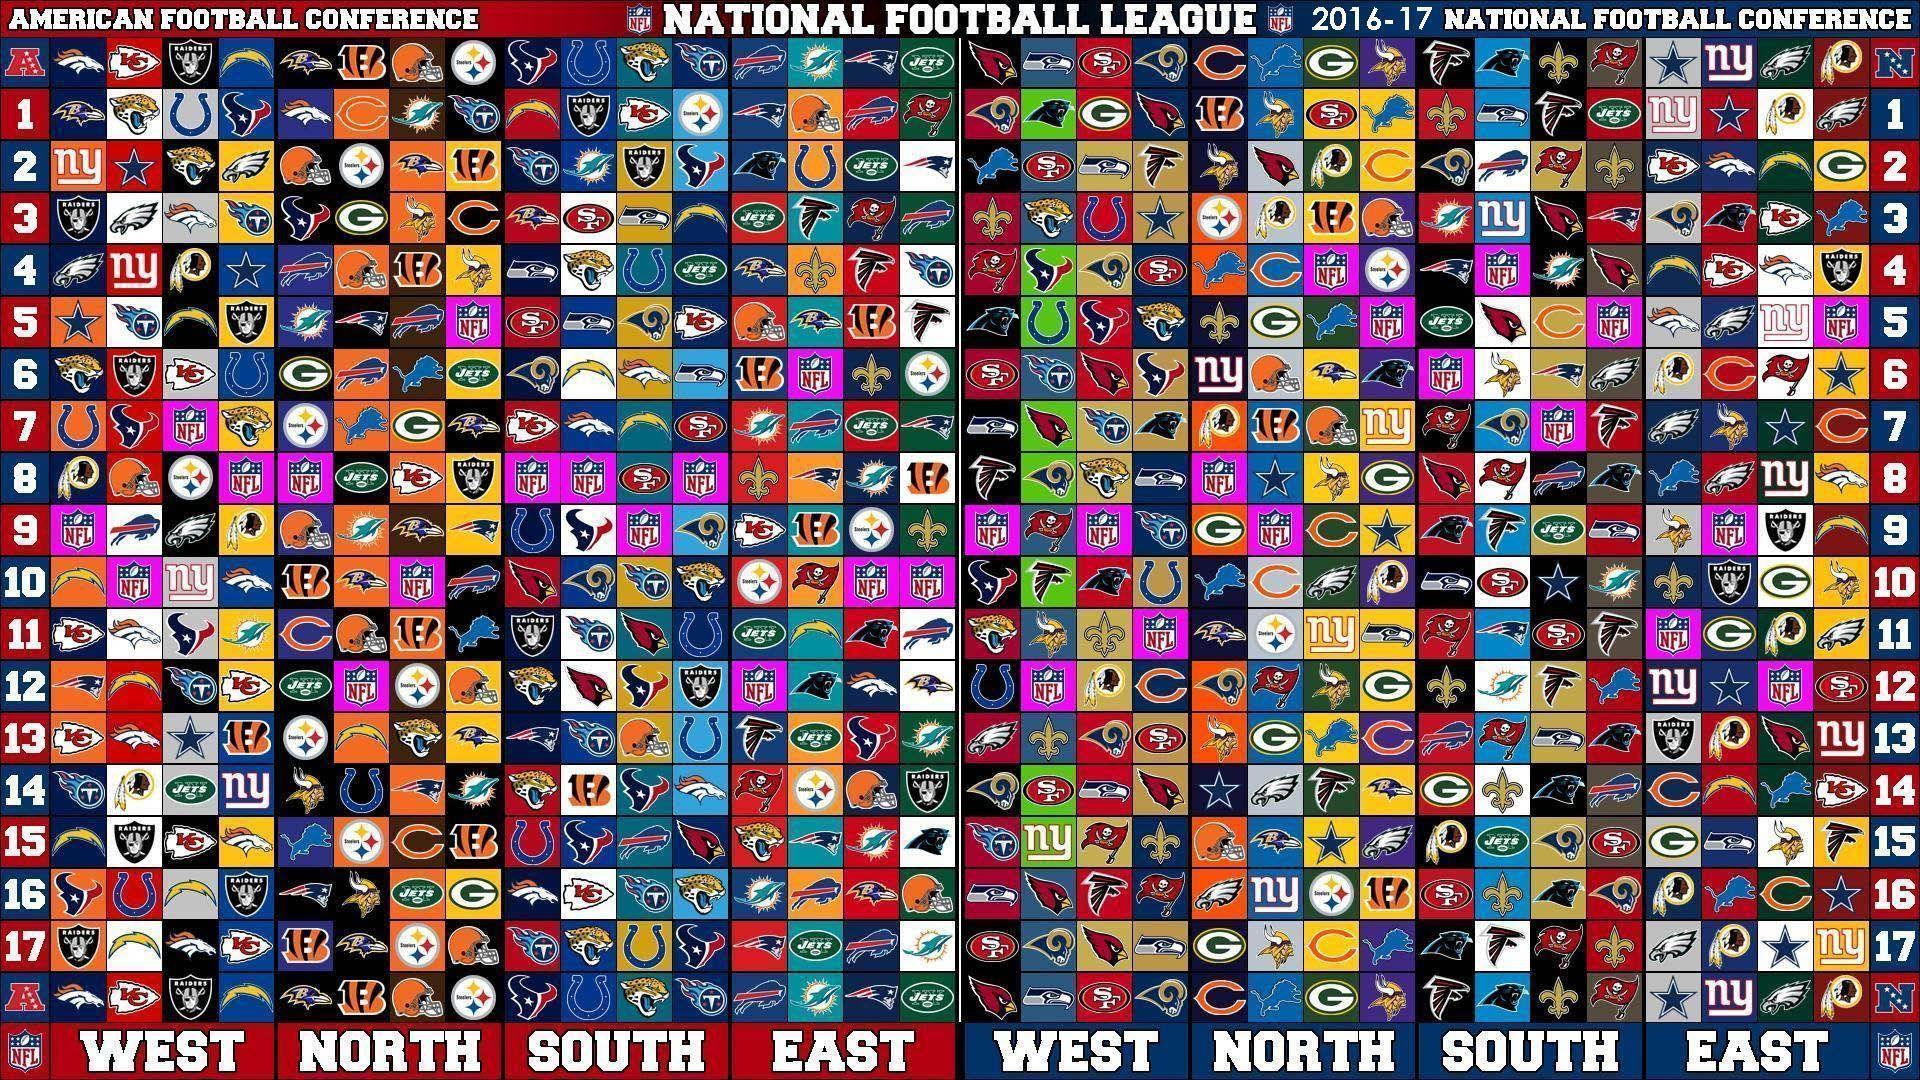 NFL game Schedule and Team name of 2016